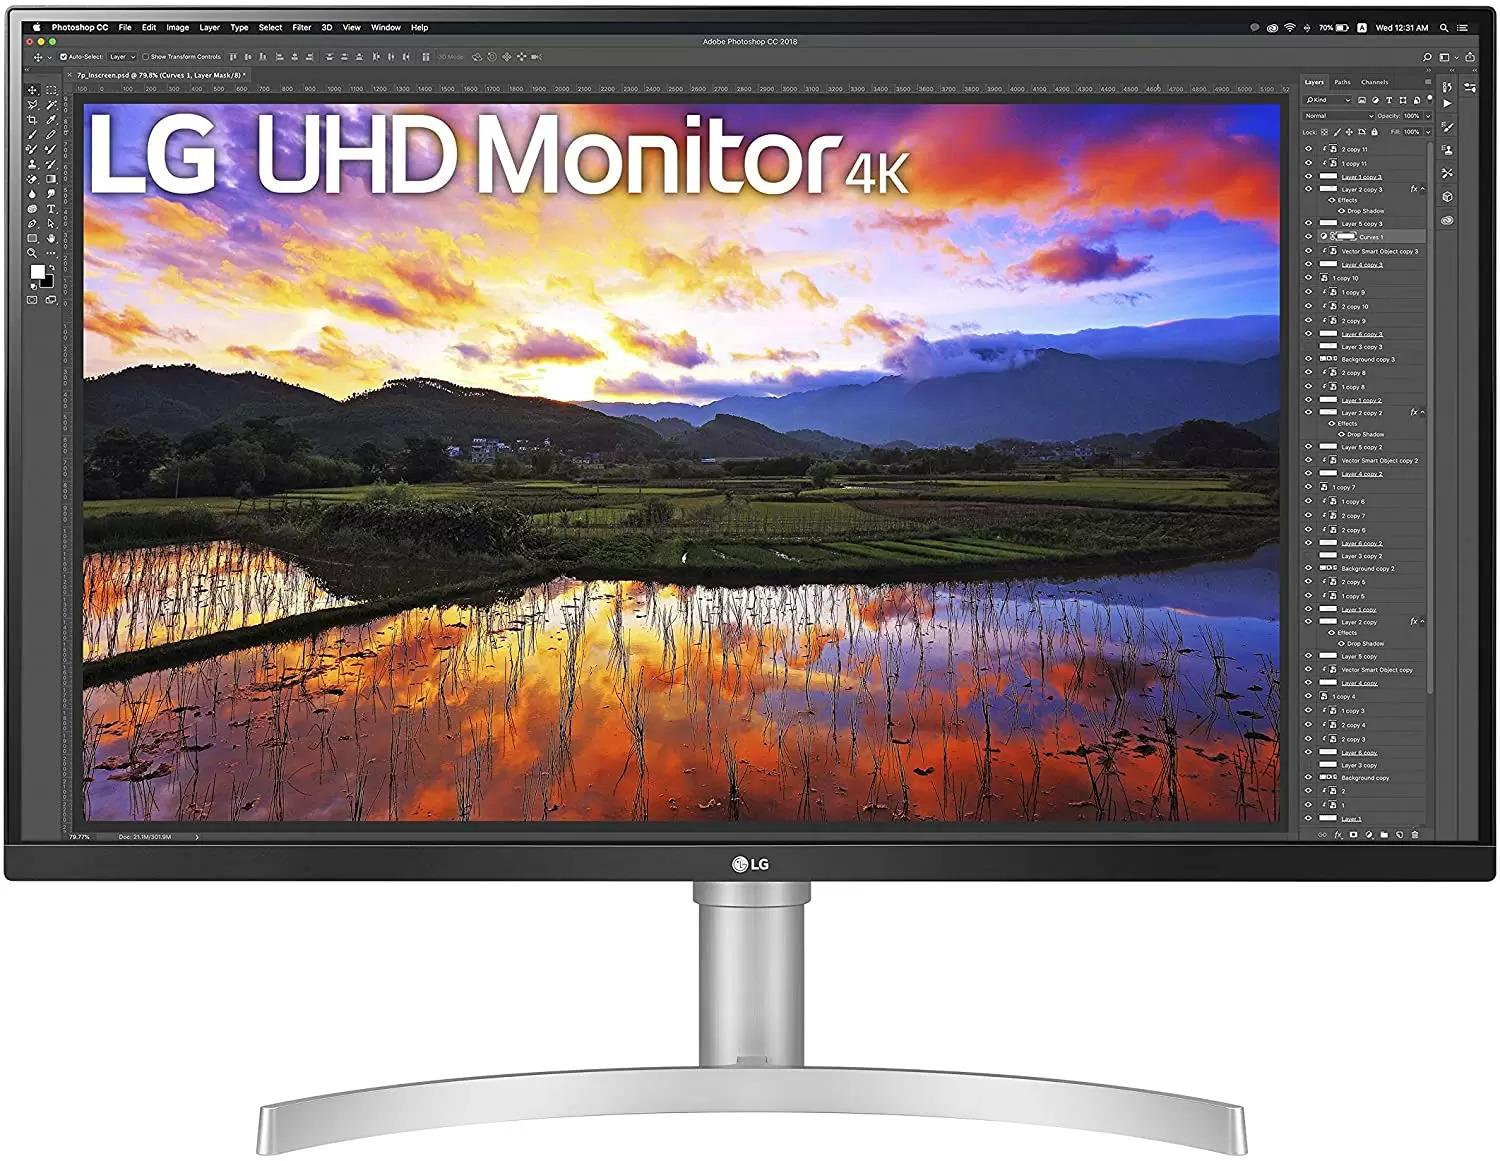 32in LG 32UN650-W Ultrafine IPS Monitor for $399.99 Shipped